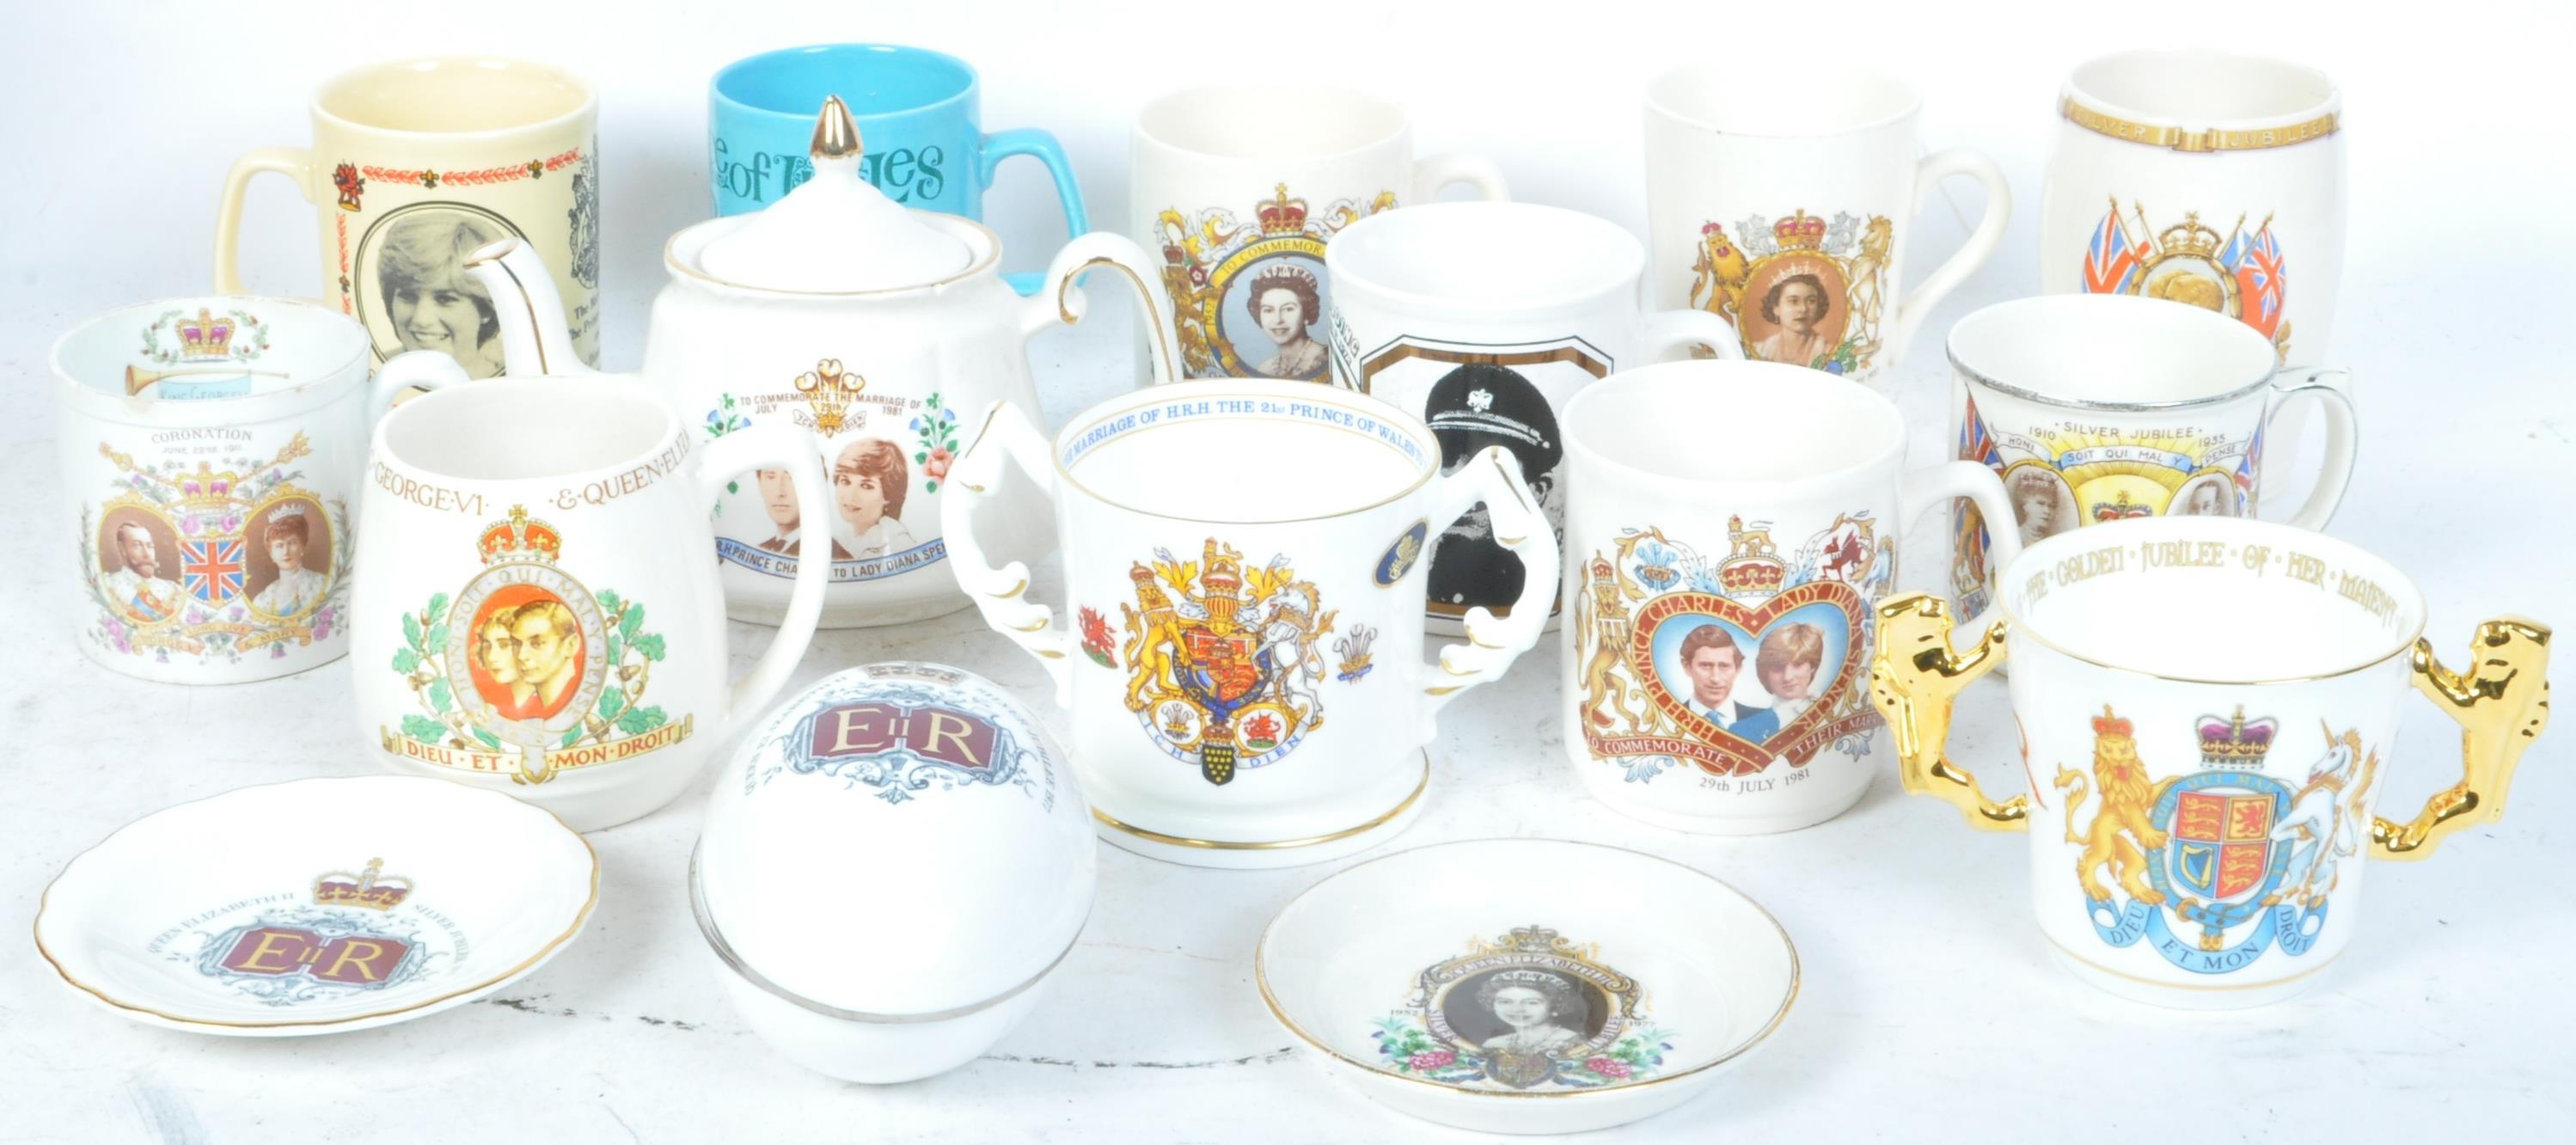 A COLLECTION OF CERAMIC COMMEMORATIVE CUPS & SAUCERS